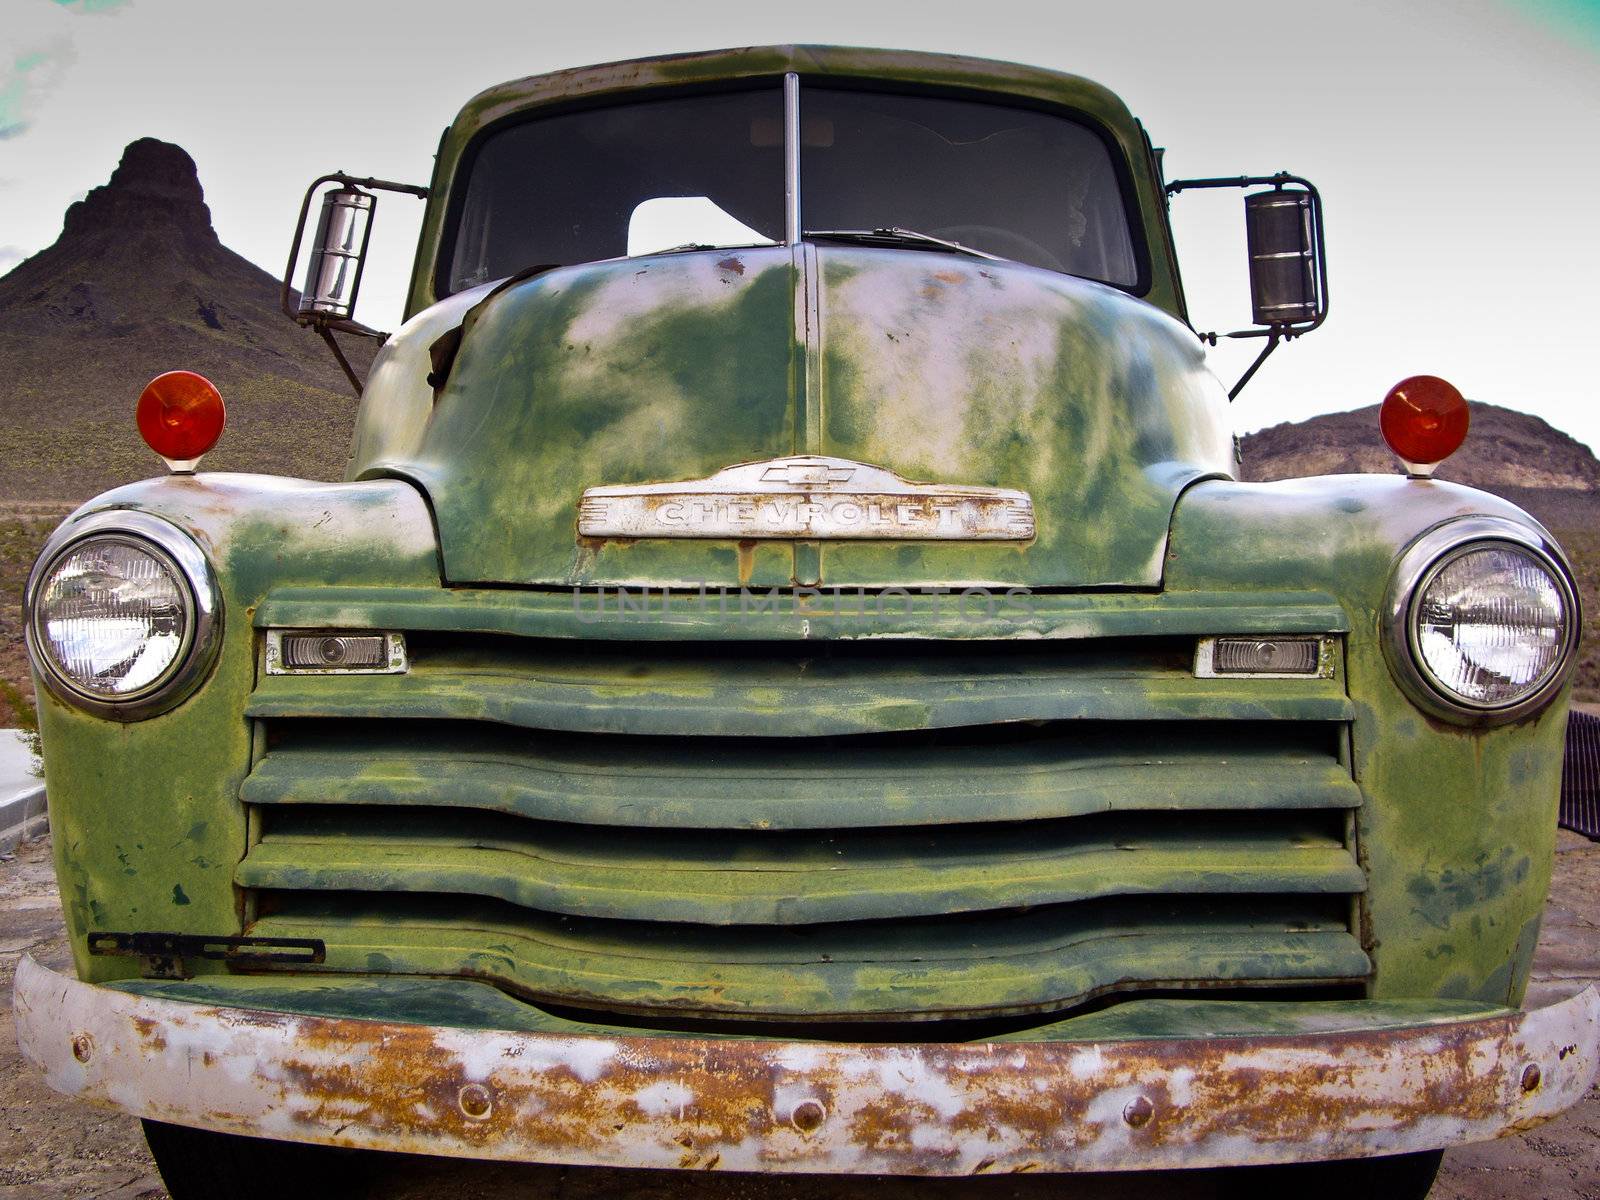 Rusted Old Chevy Truck by emattil